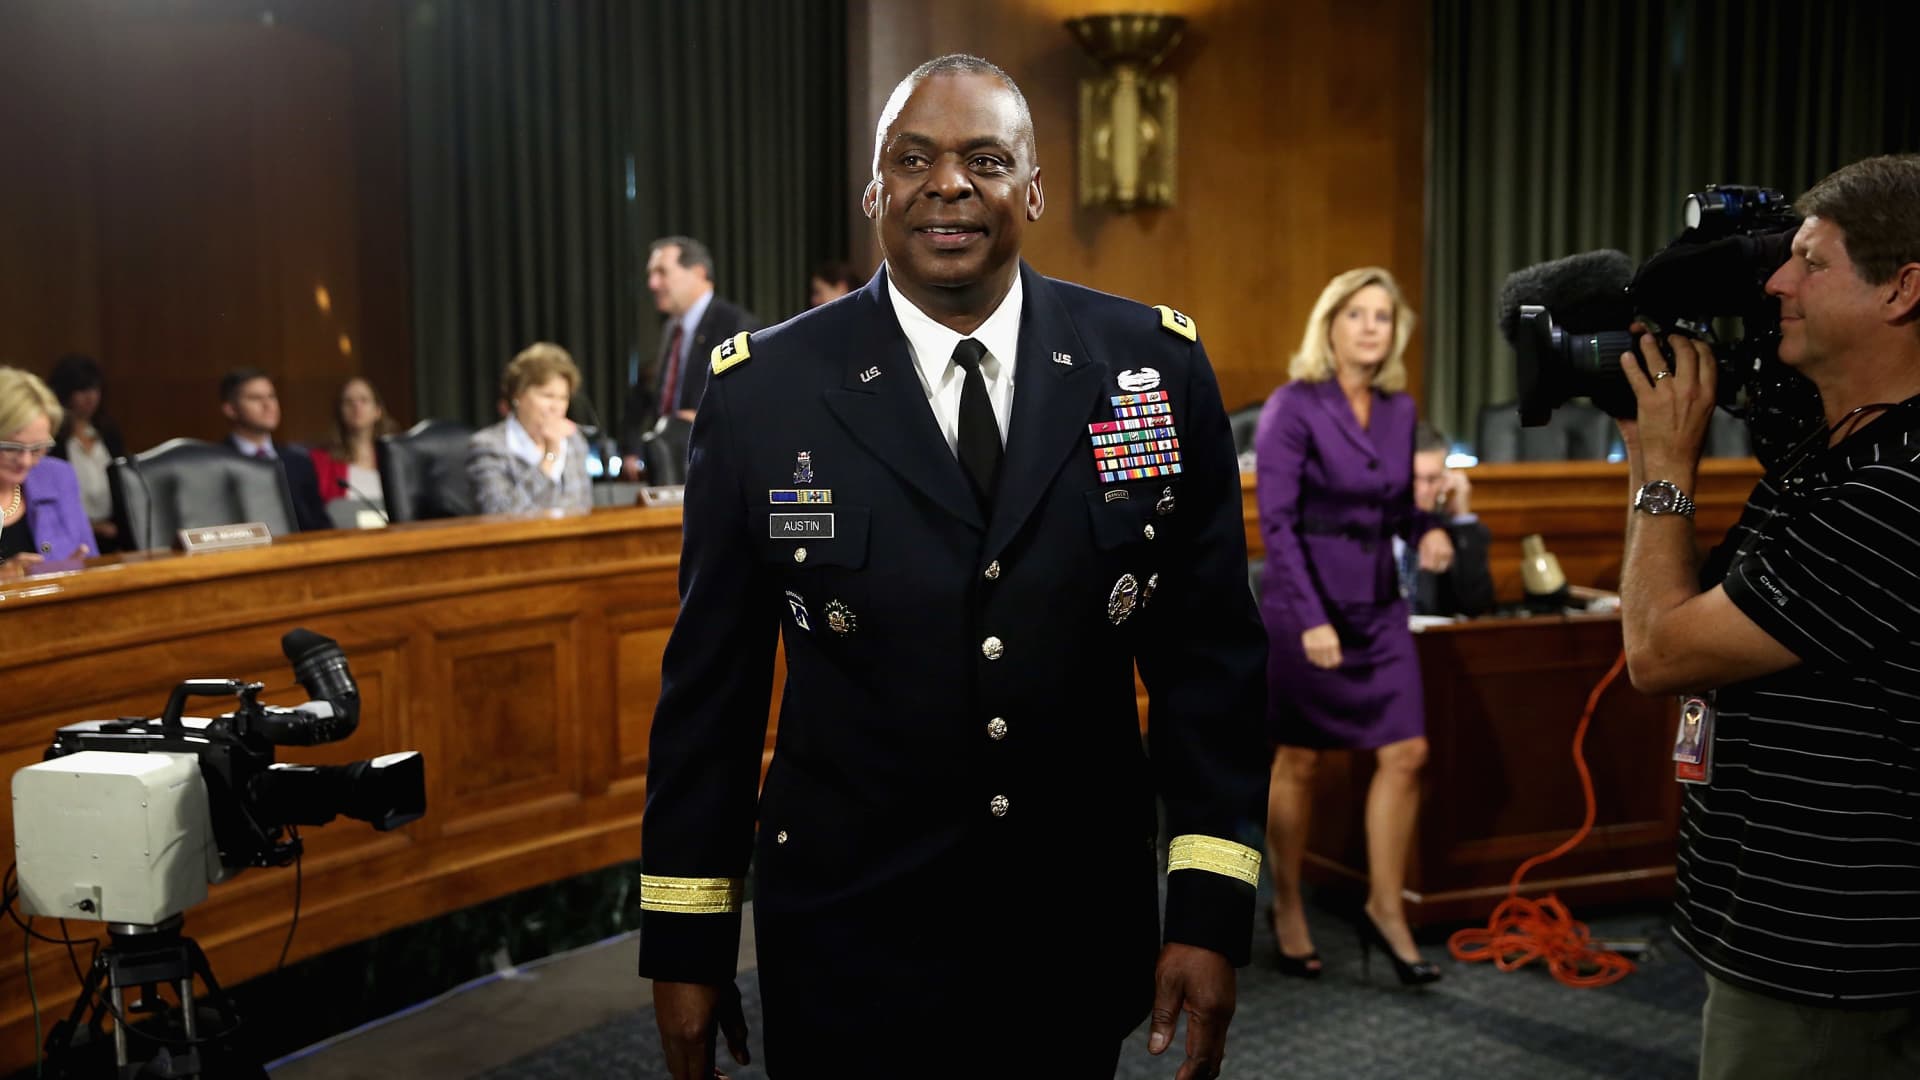 Gen. Lloyd Austin III, commander of U.S. Central Command, prepares to testify before the Senate Armed Services Committee on September 16, 2015 in Washington, DC.